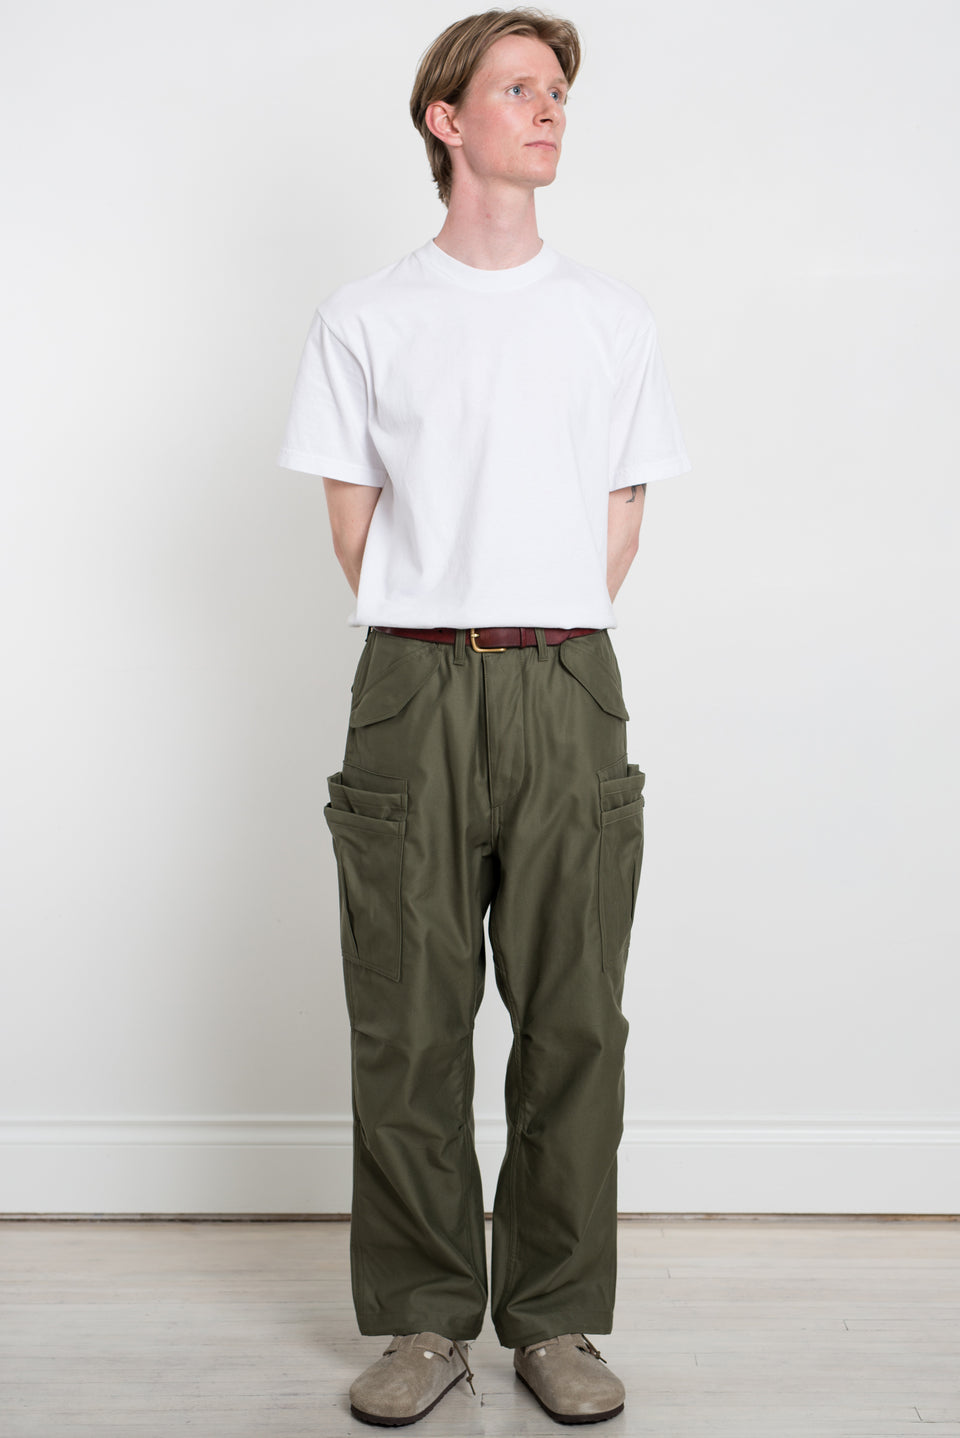 Sassafras SS23 Made in Japan SF-232009 Overgrown Pants Back Satin Olive Calculus Victoria BC Canada